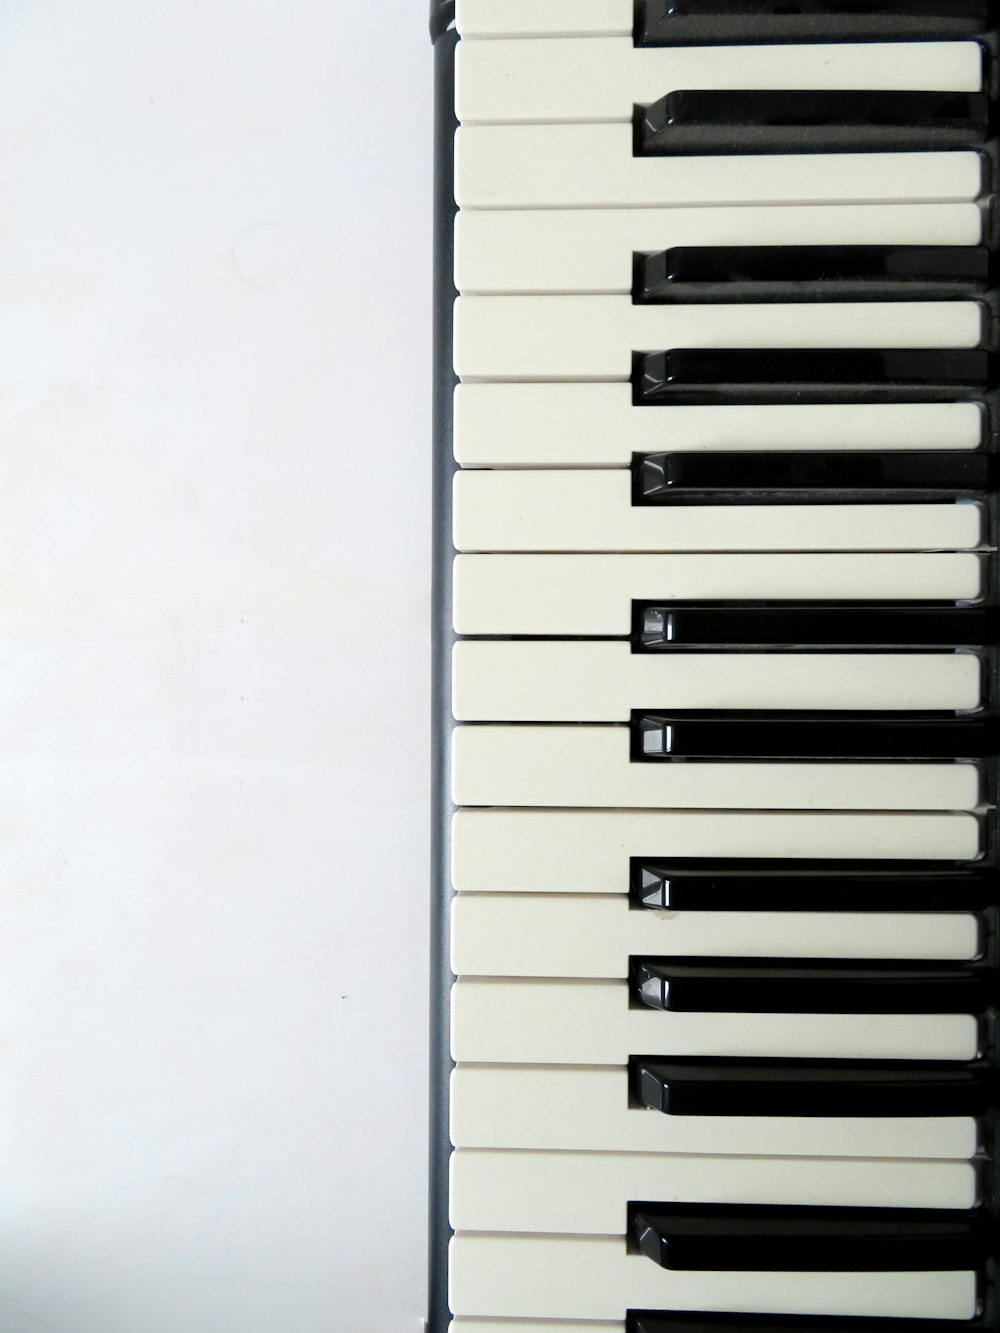 350 Piano Pictures Download Free Images & Stock Photos on Unsplash